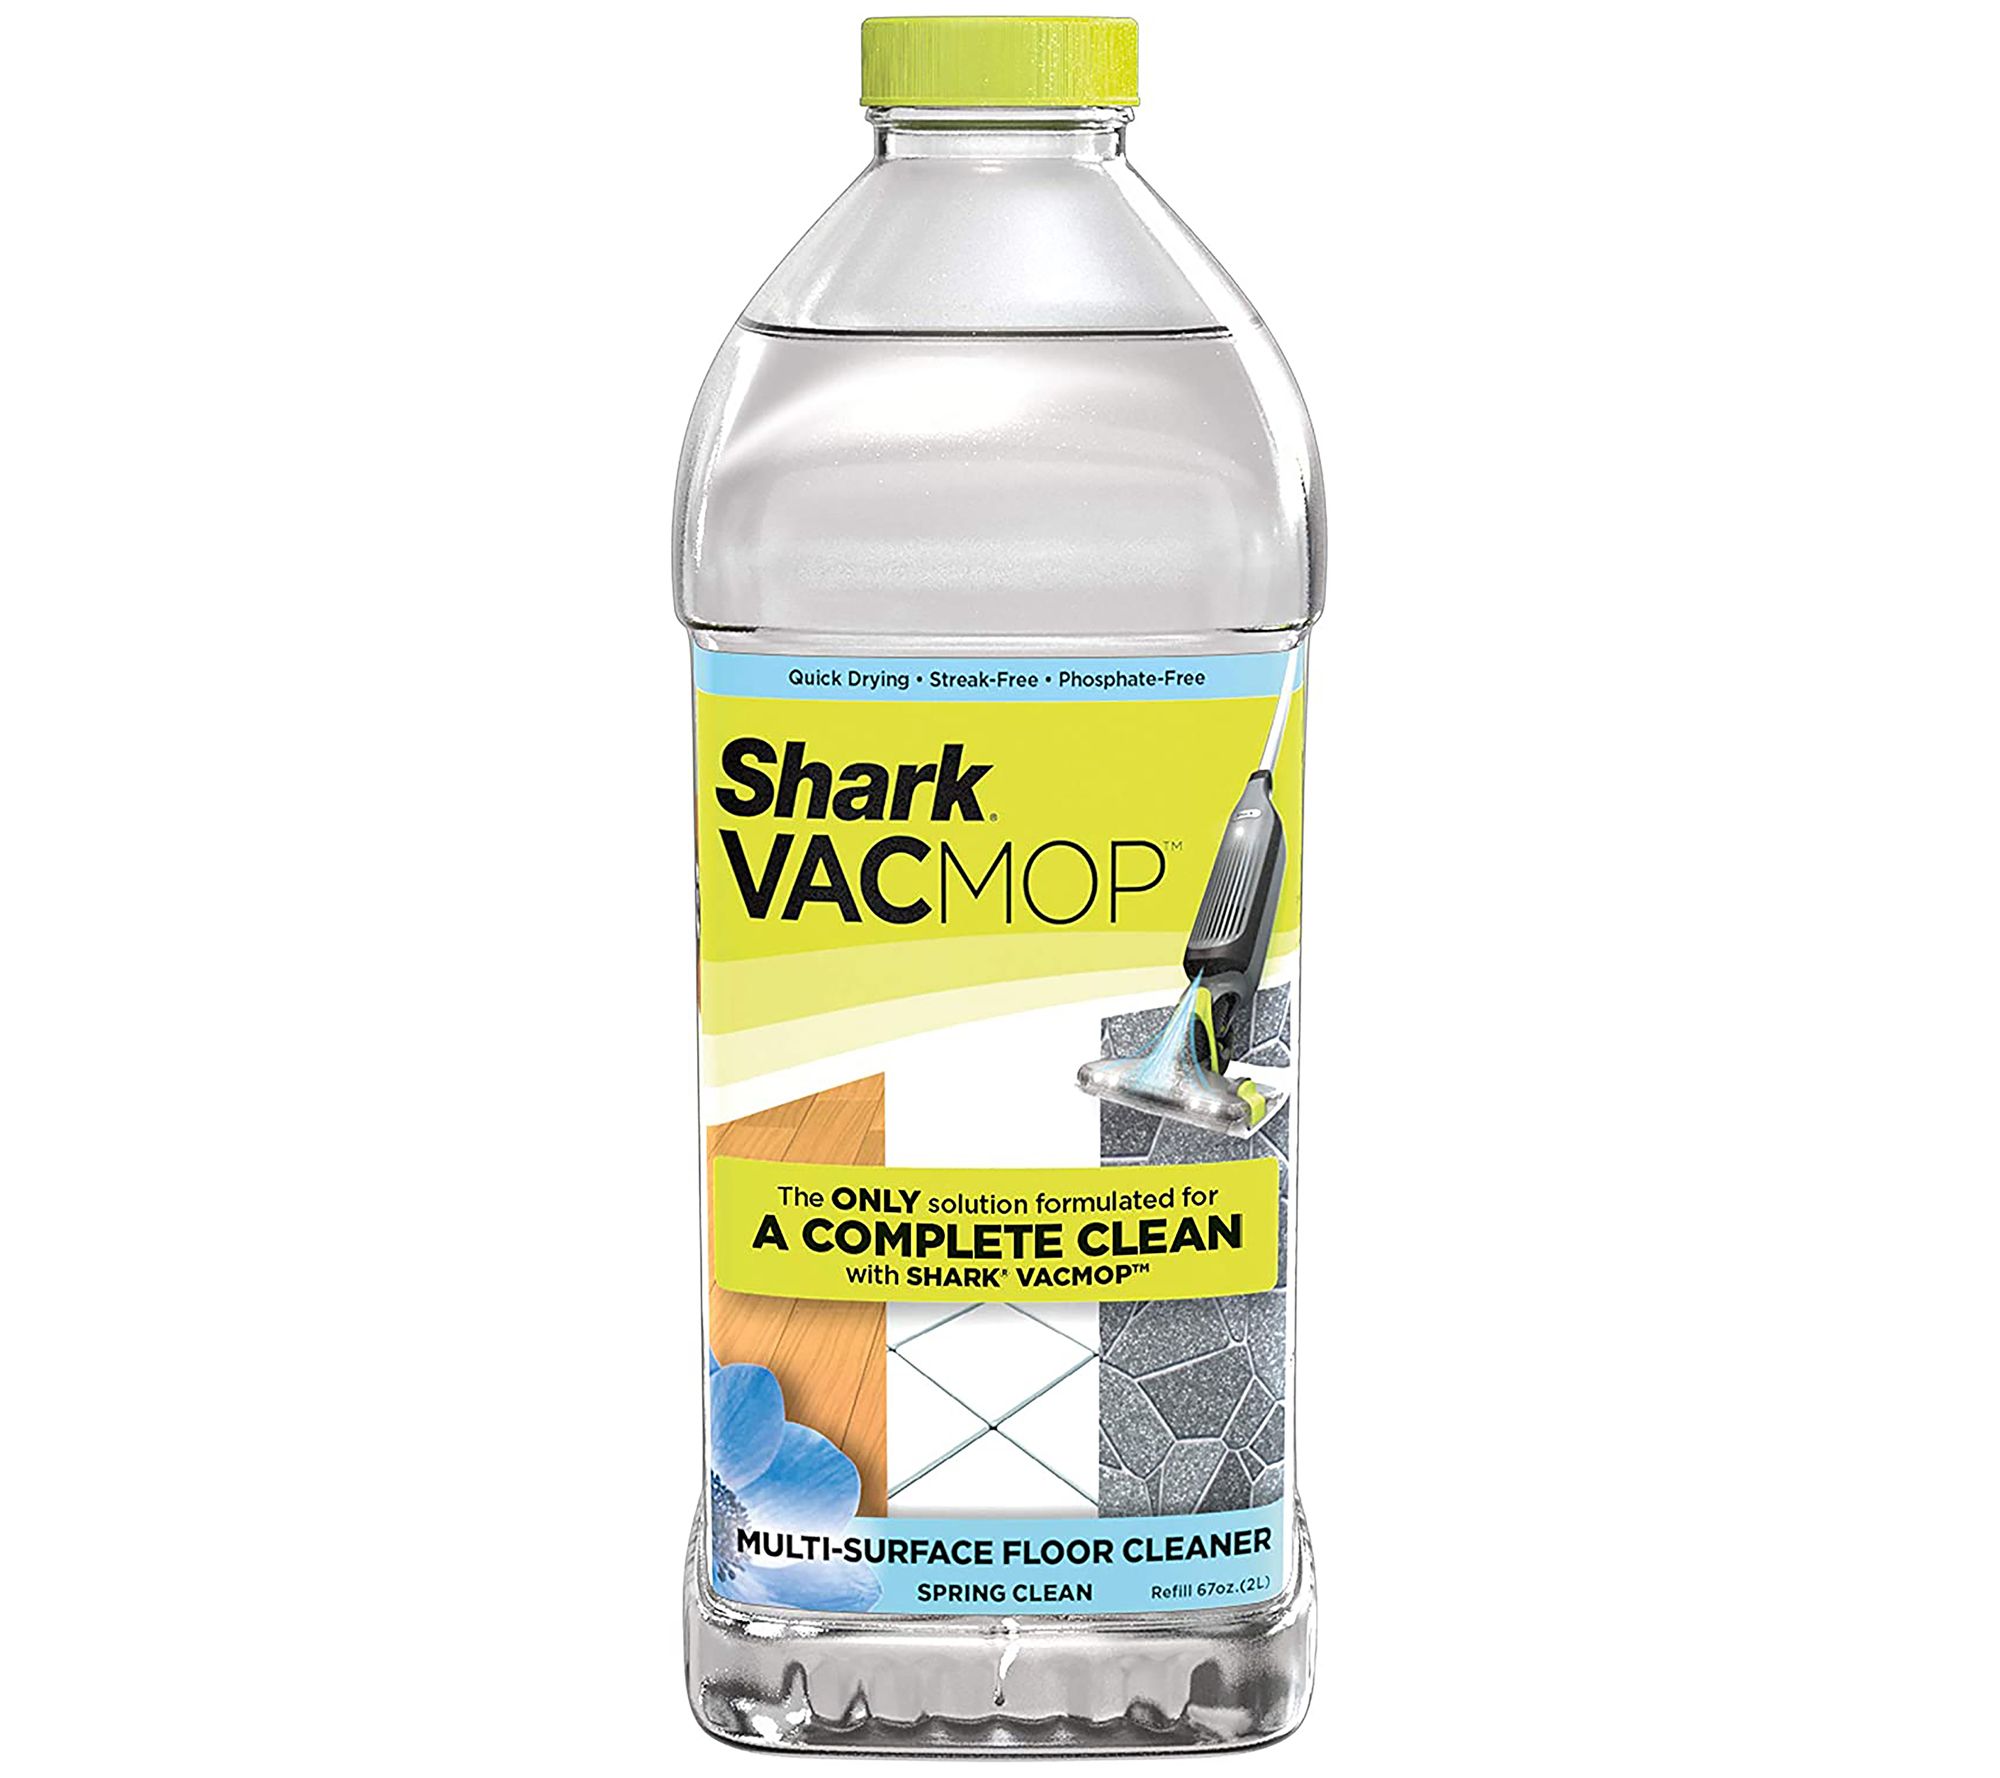 Shark VacMop Multi Surface Cleaner Solution Refill Spring Clean Scent 